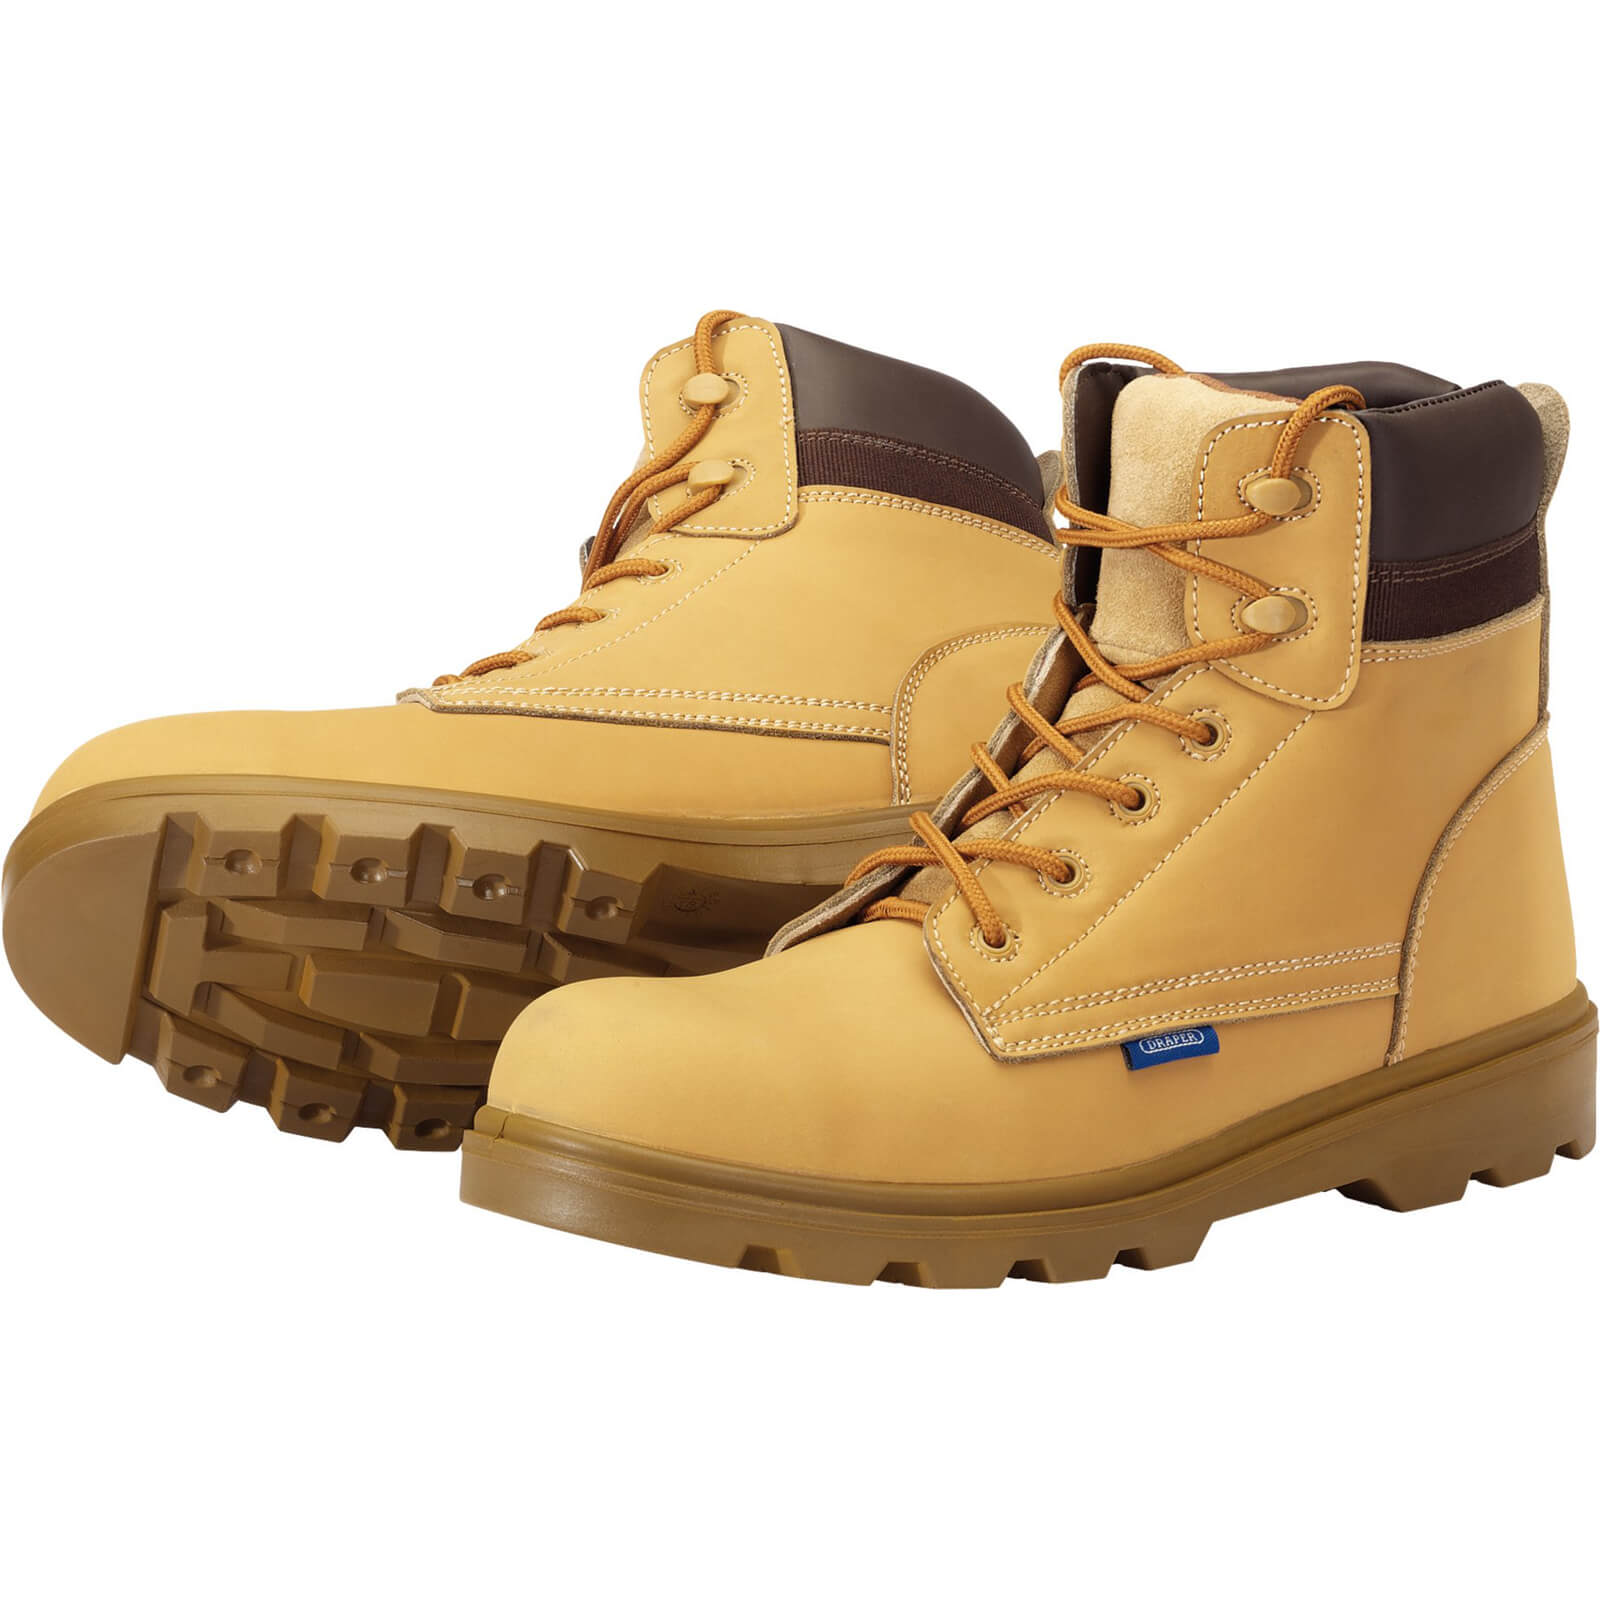 Image of Draper Mens Nubuck Style Safety Boots Tan Size 11